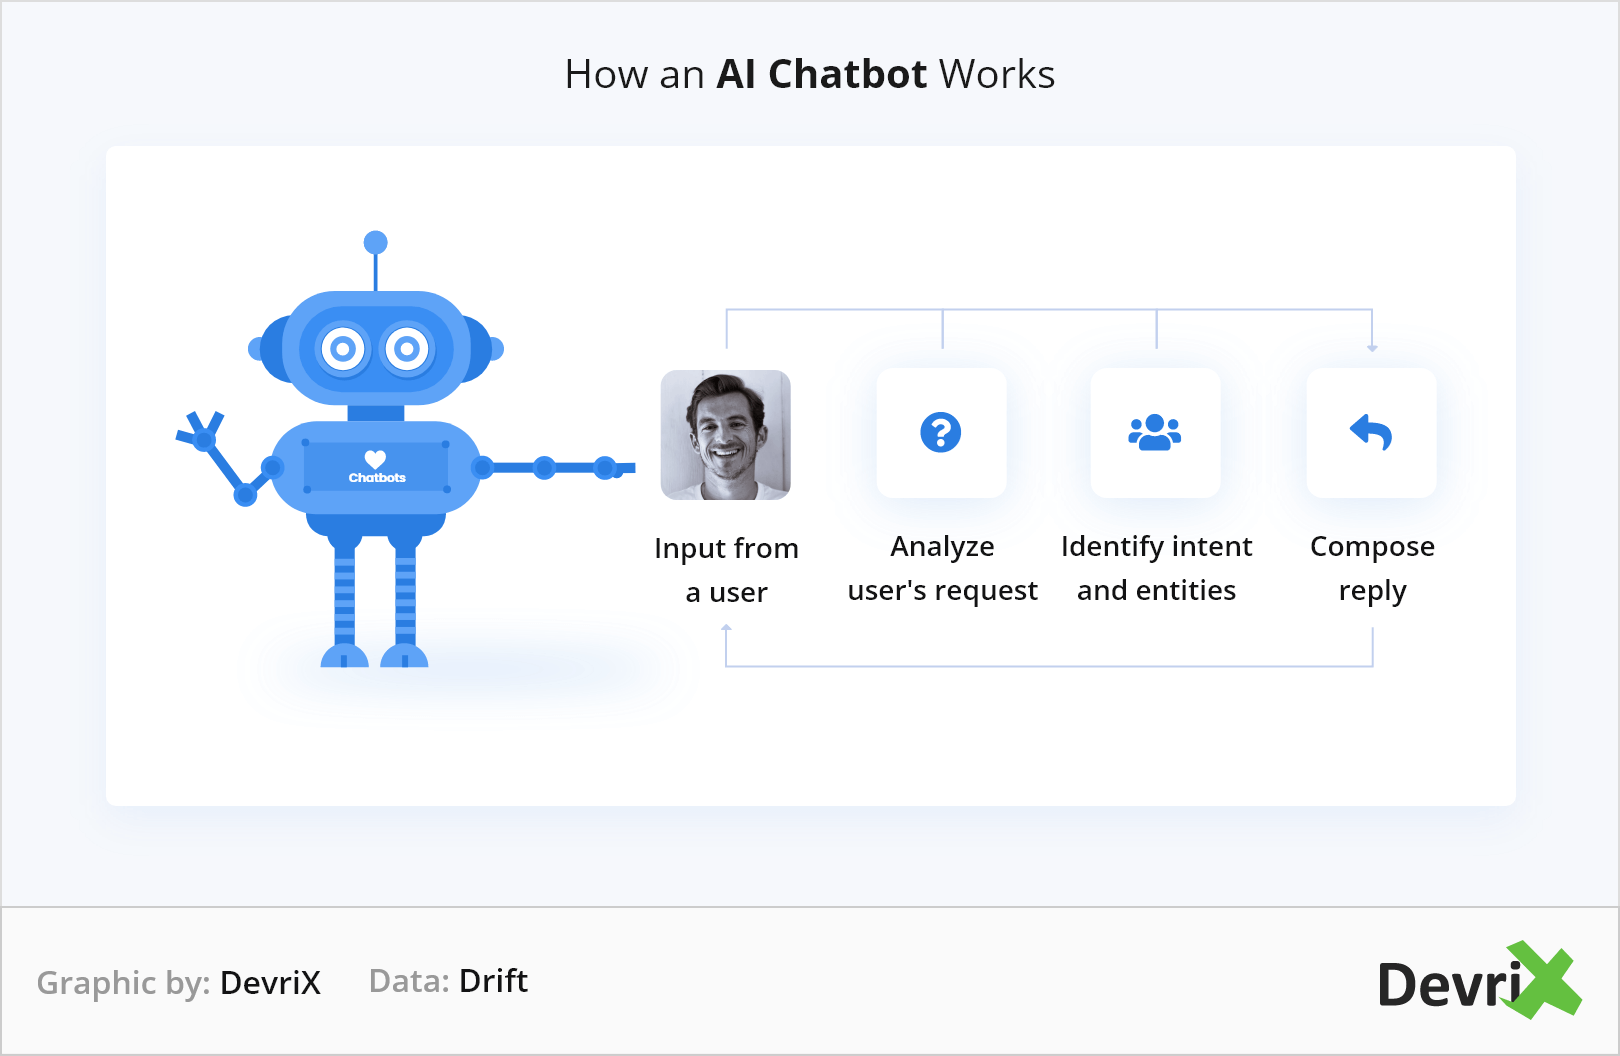 How an AI Chatbot Works